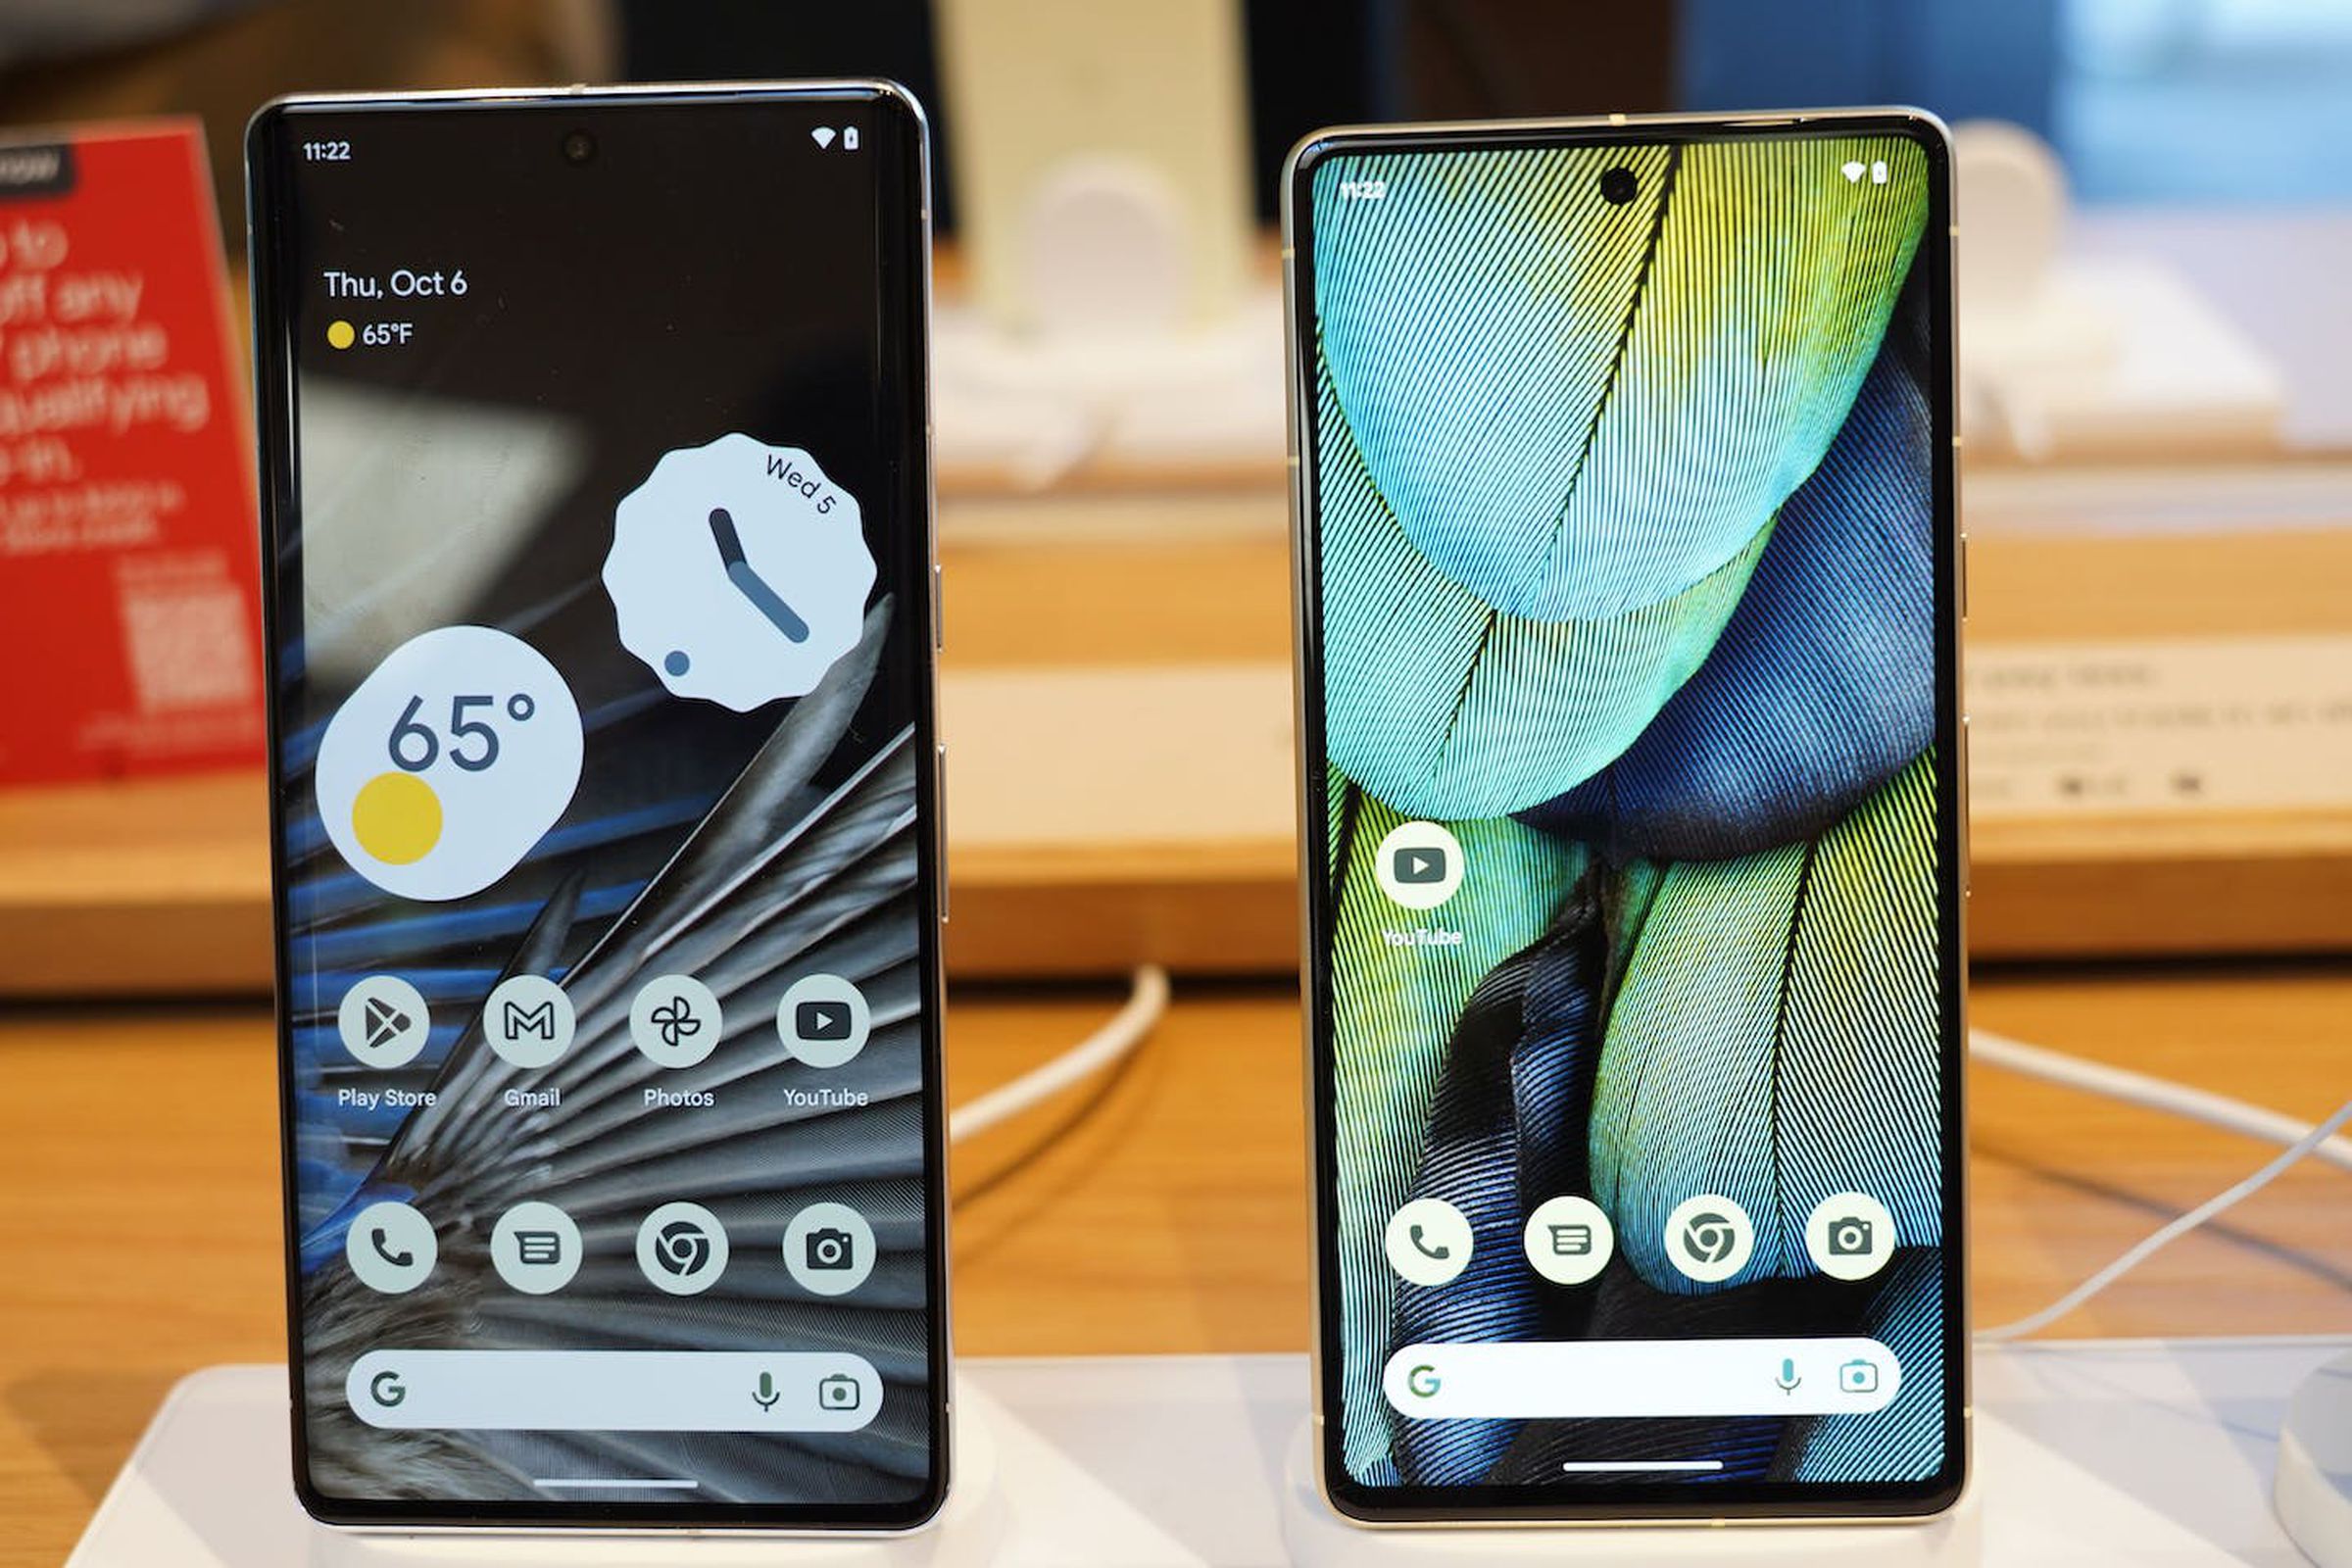 The bigger Pixel 7 Pro (left) and Pixel 7 (right) standing upright while turned on.